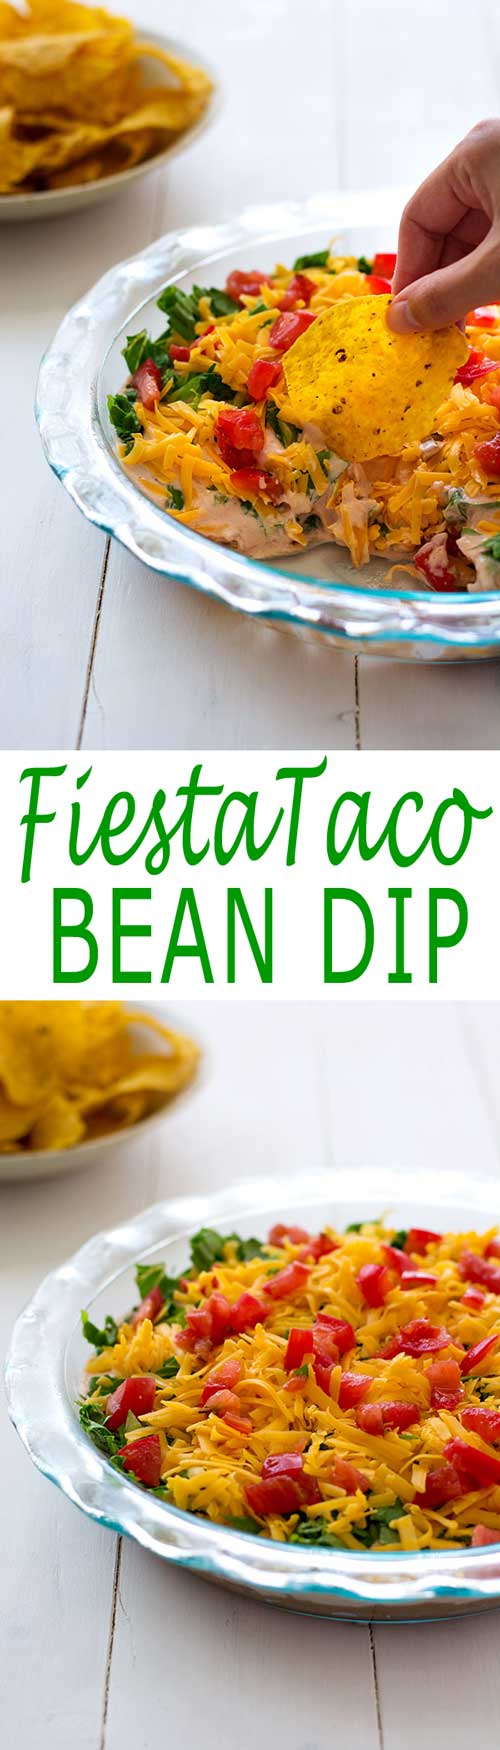 Fiesta Bean Dip layered with refried beans, salsa, sour cream, cheese, lettuce and tomatoes! | Kitchen Gidget